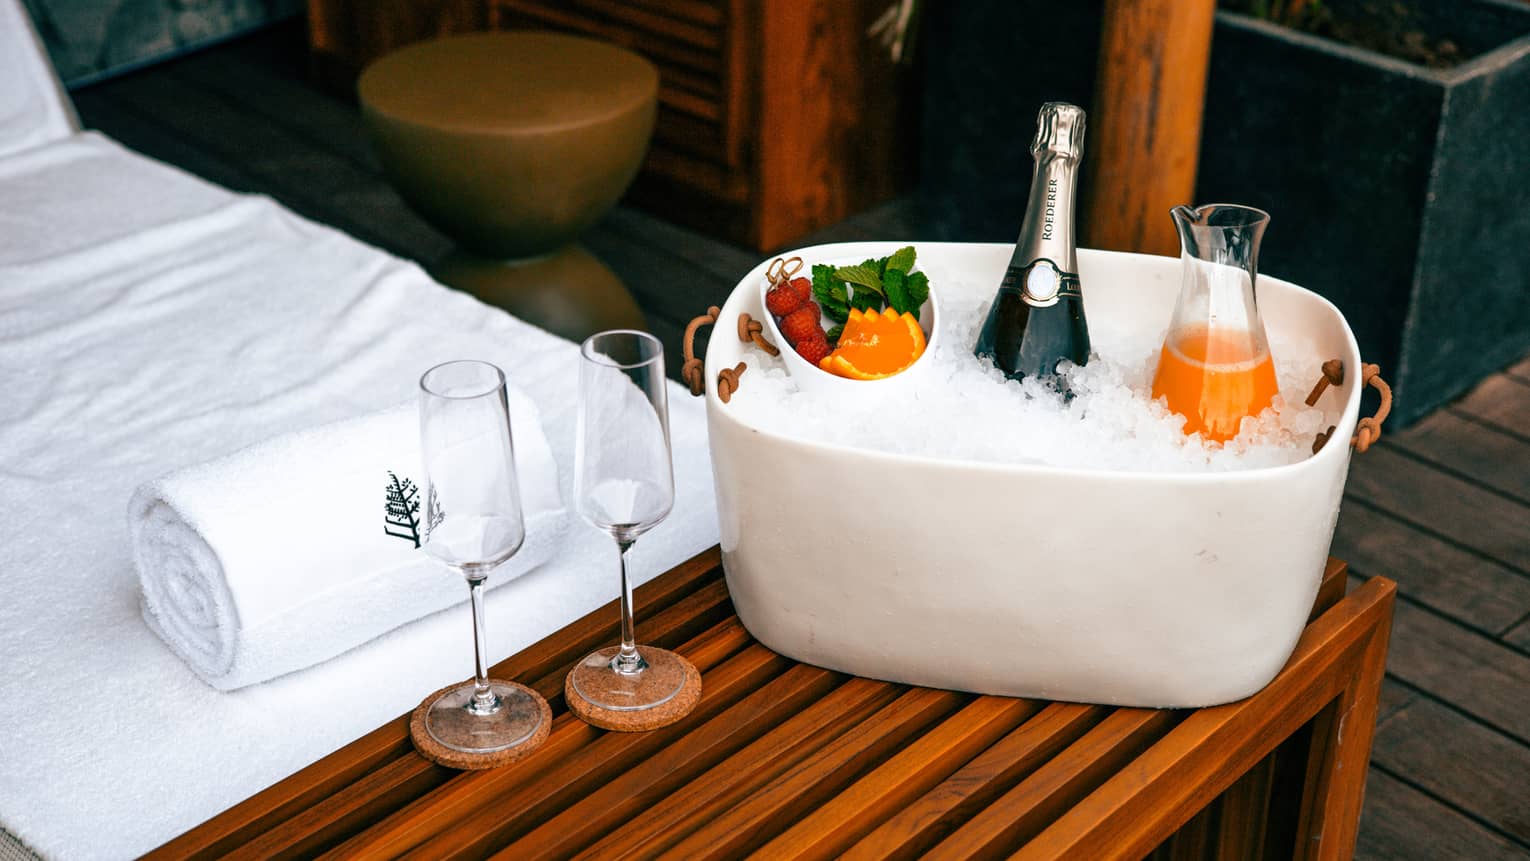 A white ceramic ice bucket holds a bottle of champagne, a glass carafe filled with fresh-squeezed orange juice and a small bowl of fruit, set next to two champagne flutes on a slated wooden bench